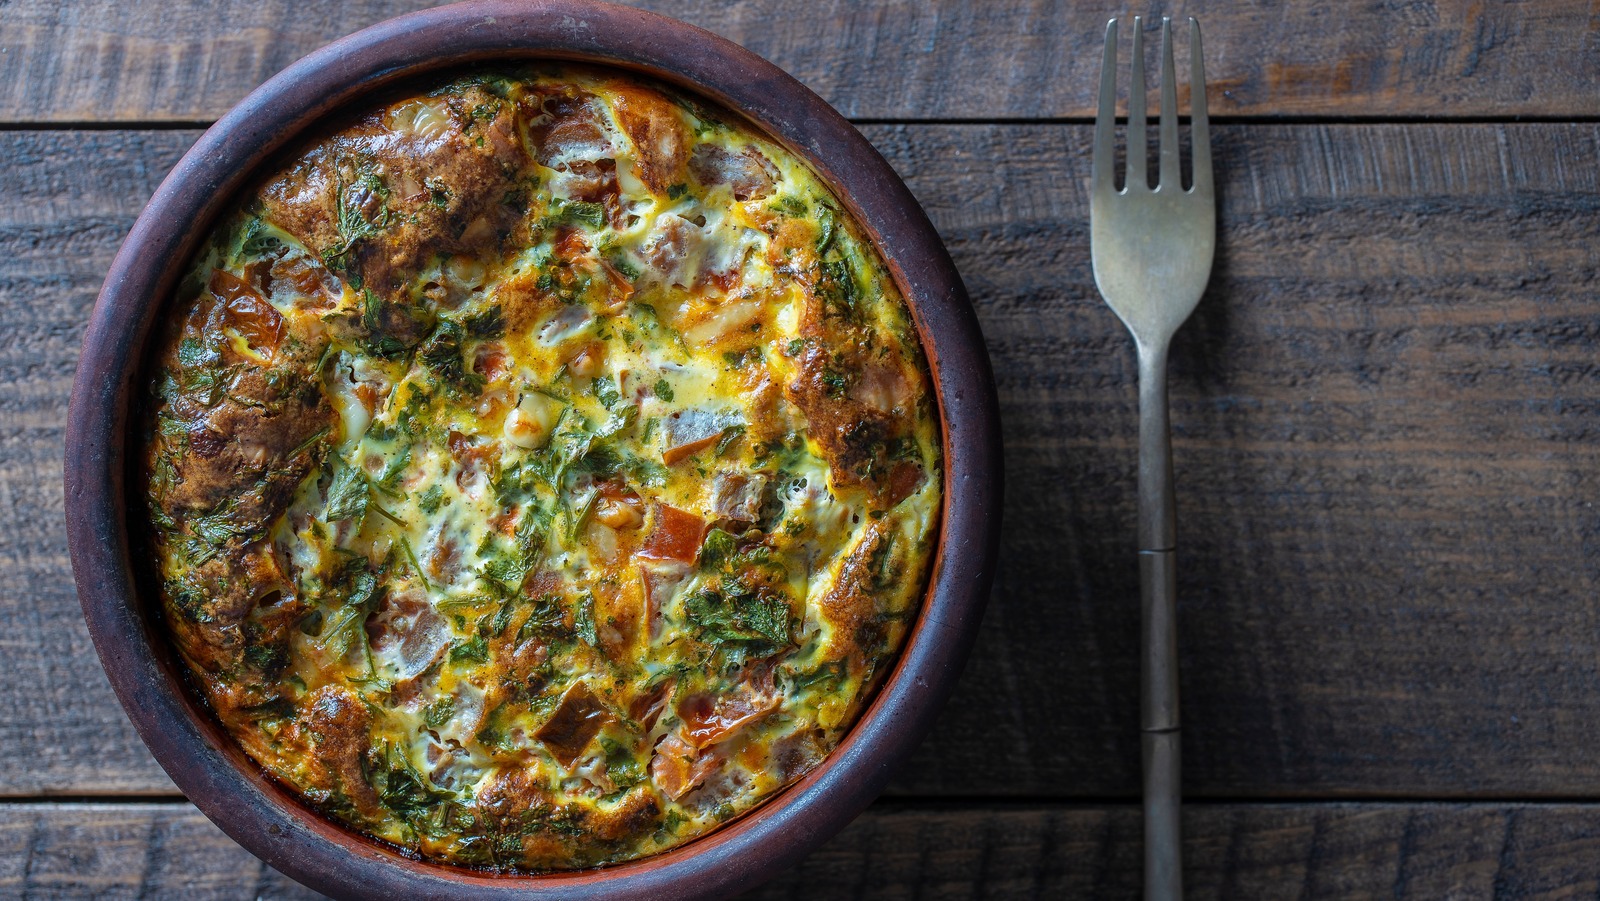 https://www.tastingtable.com/img/gallery/cooking-tips-for-the-absolute-best-frittata/l-intro-1681833666.jpg